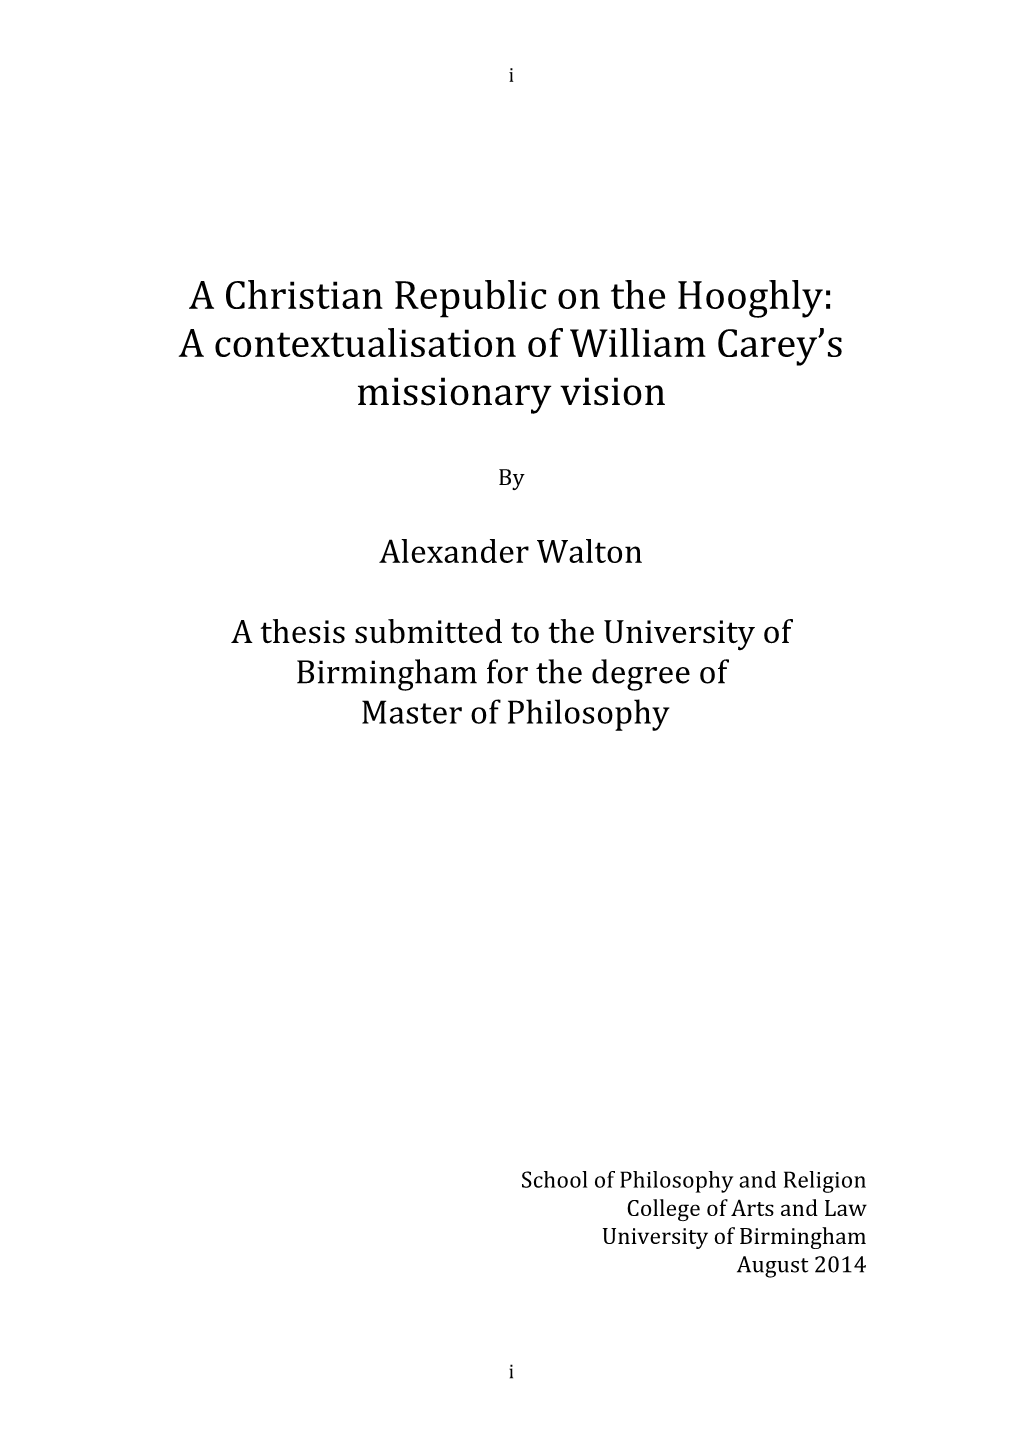 A Contextualisation of William Carey's Missionary Vision